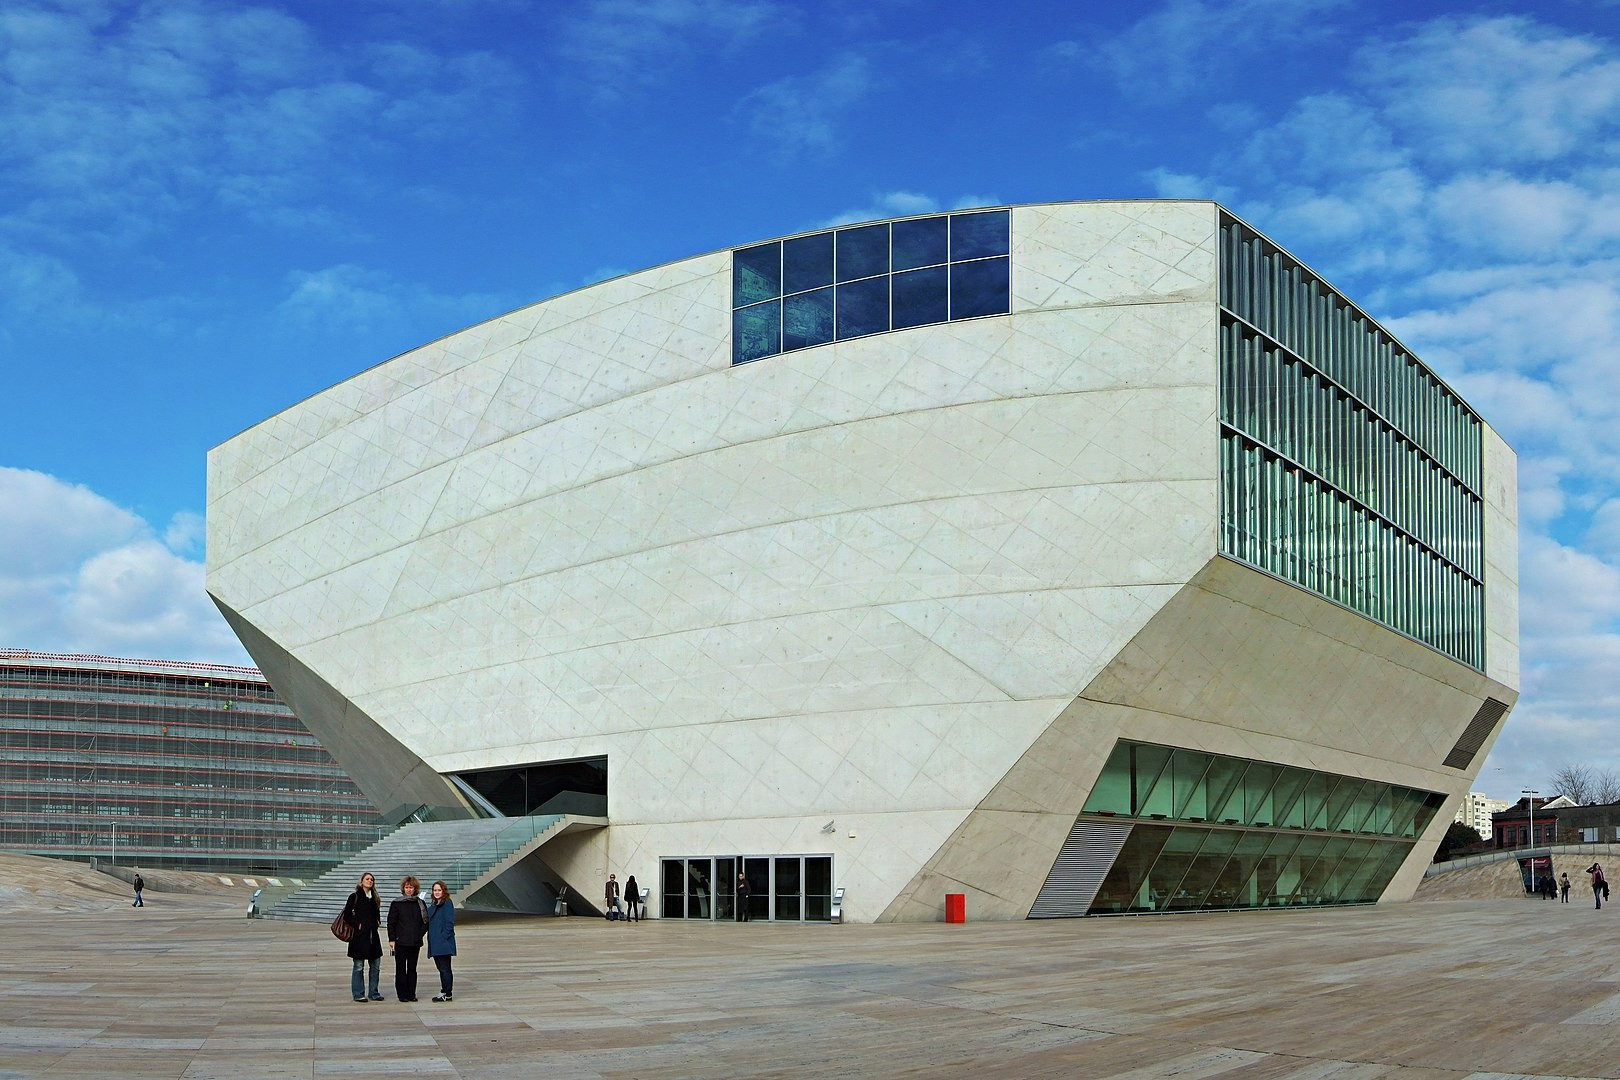 By Filipe Fortes from United States - Casa Da Musica, CC BY-SA 2.0, https://commons.wikimedia.org/w/index.php?curid=35323074